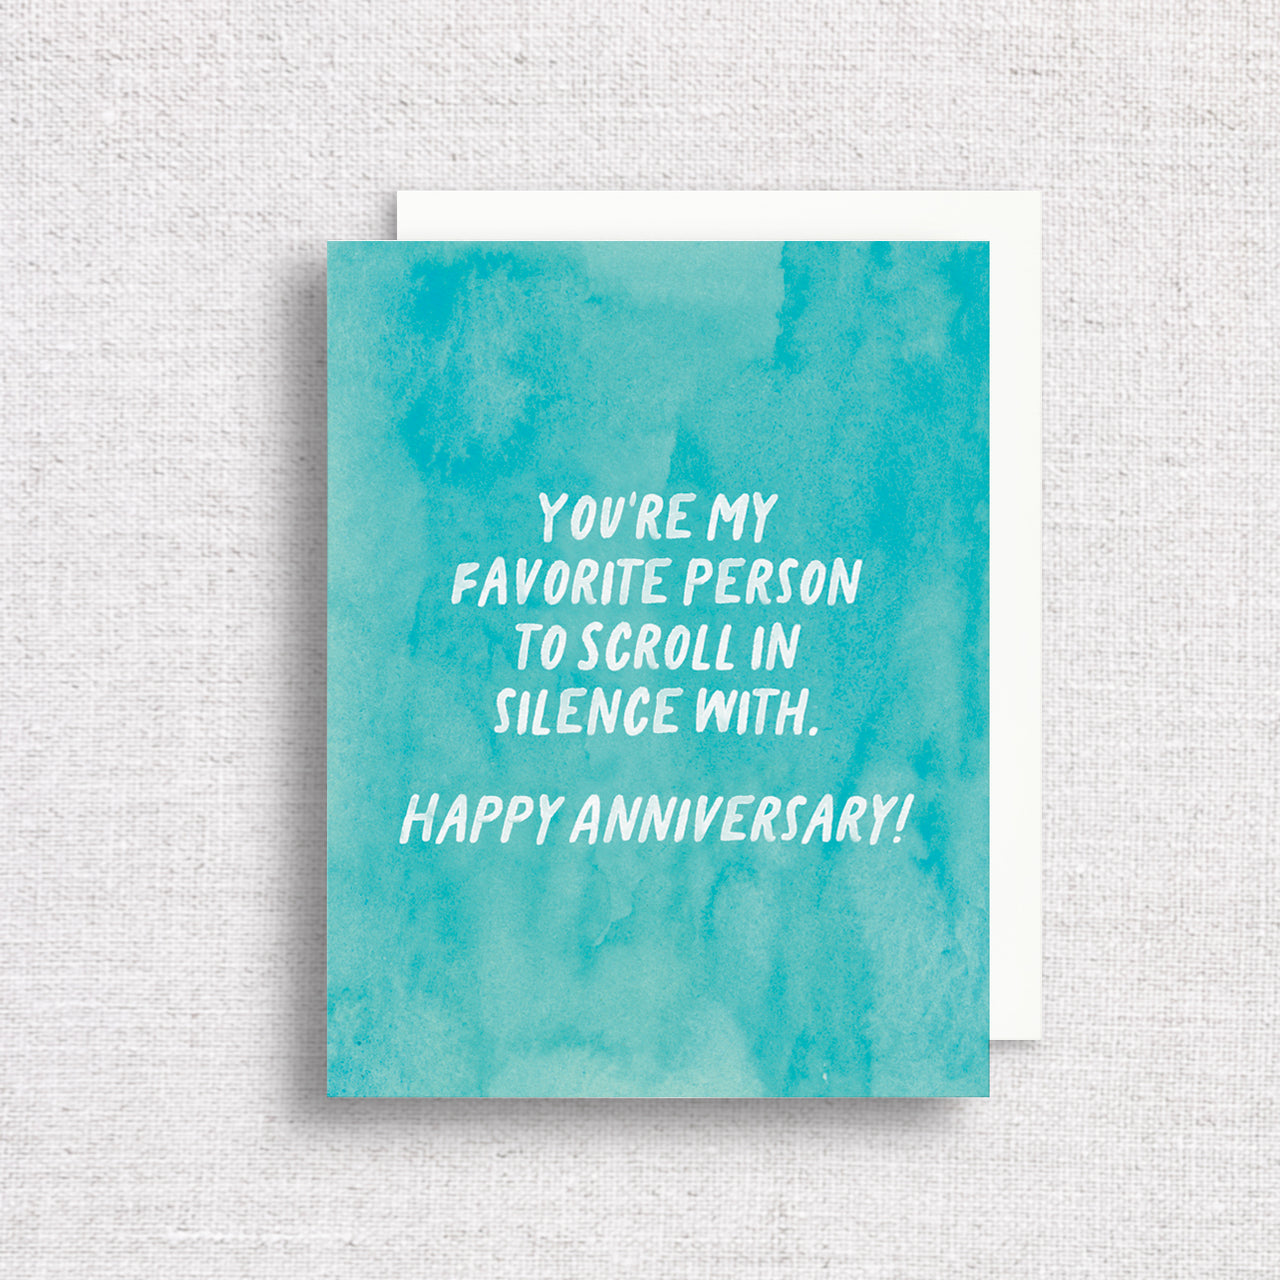 You're My Favorite to Scroll With Greeting Card by Gert & Co